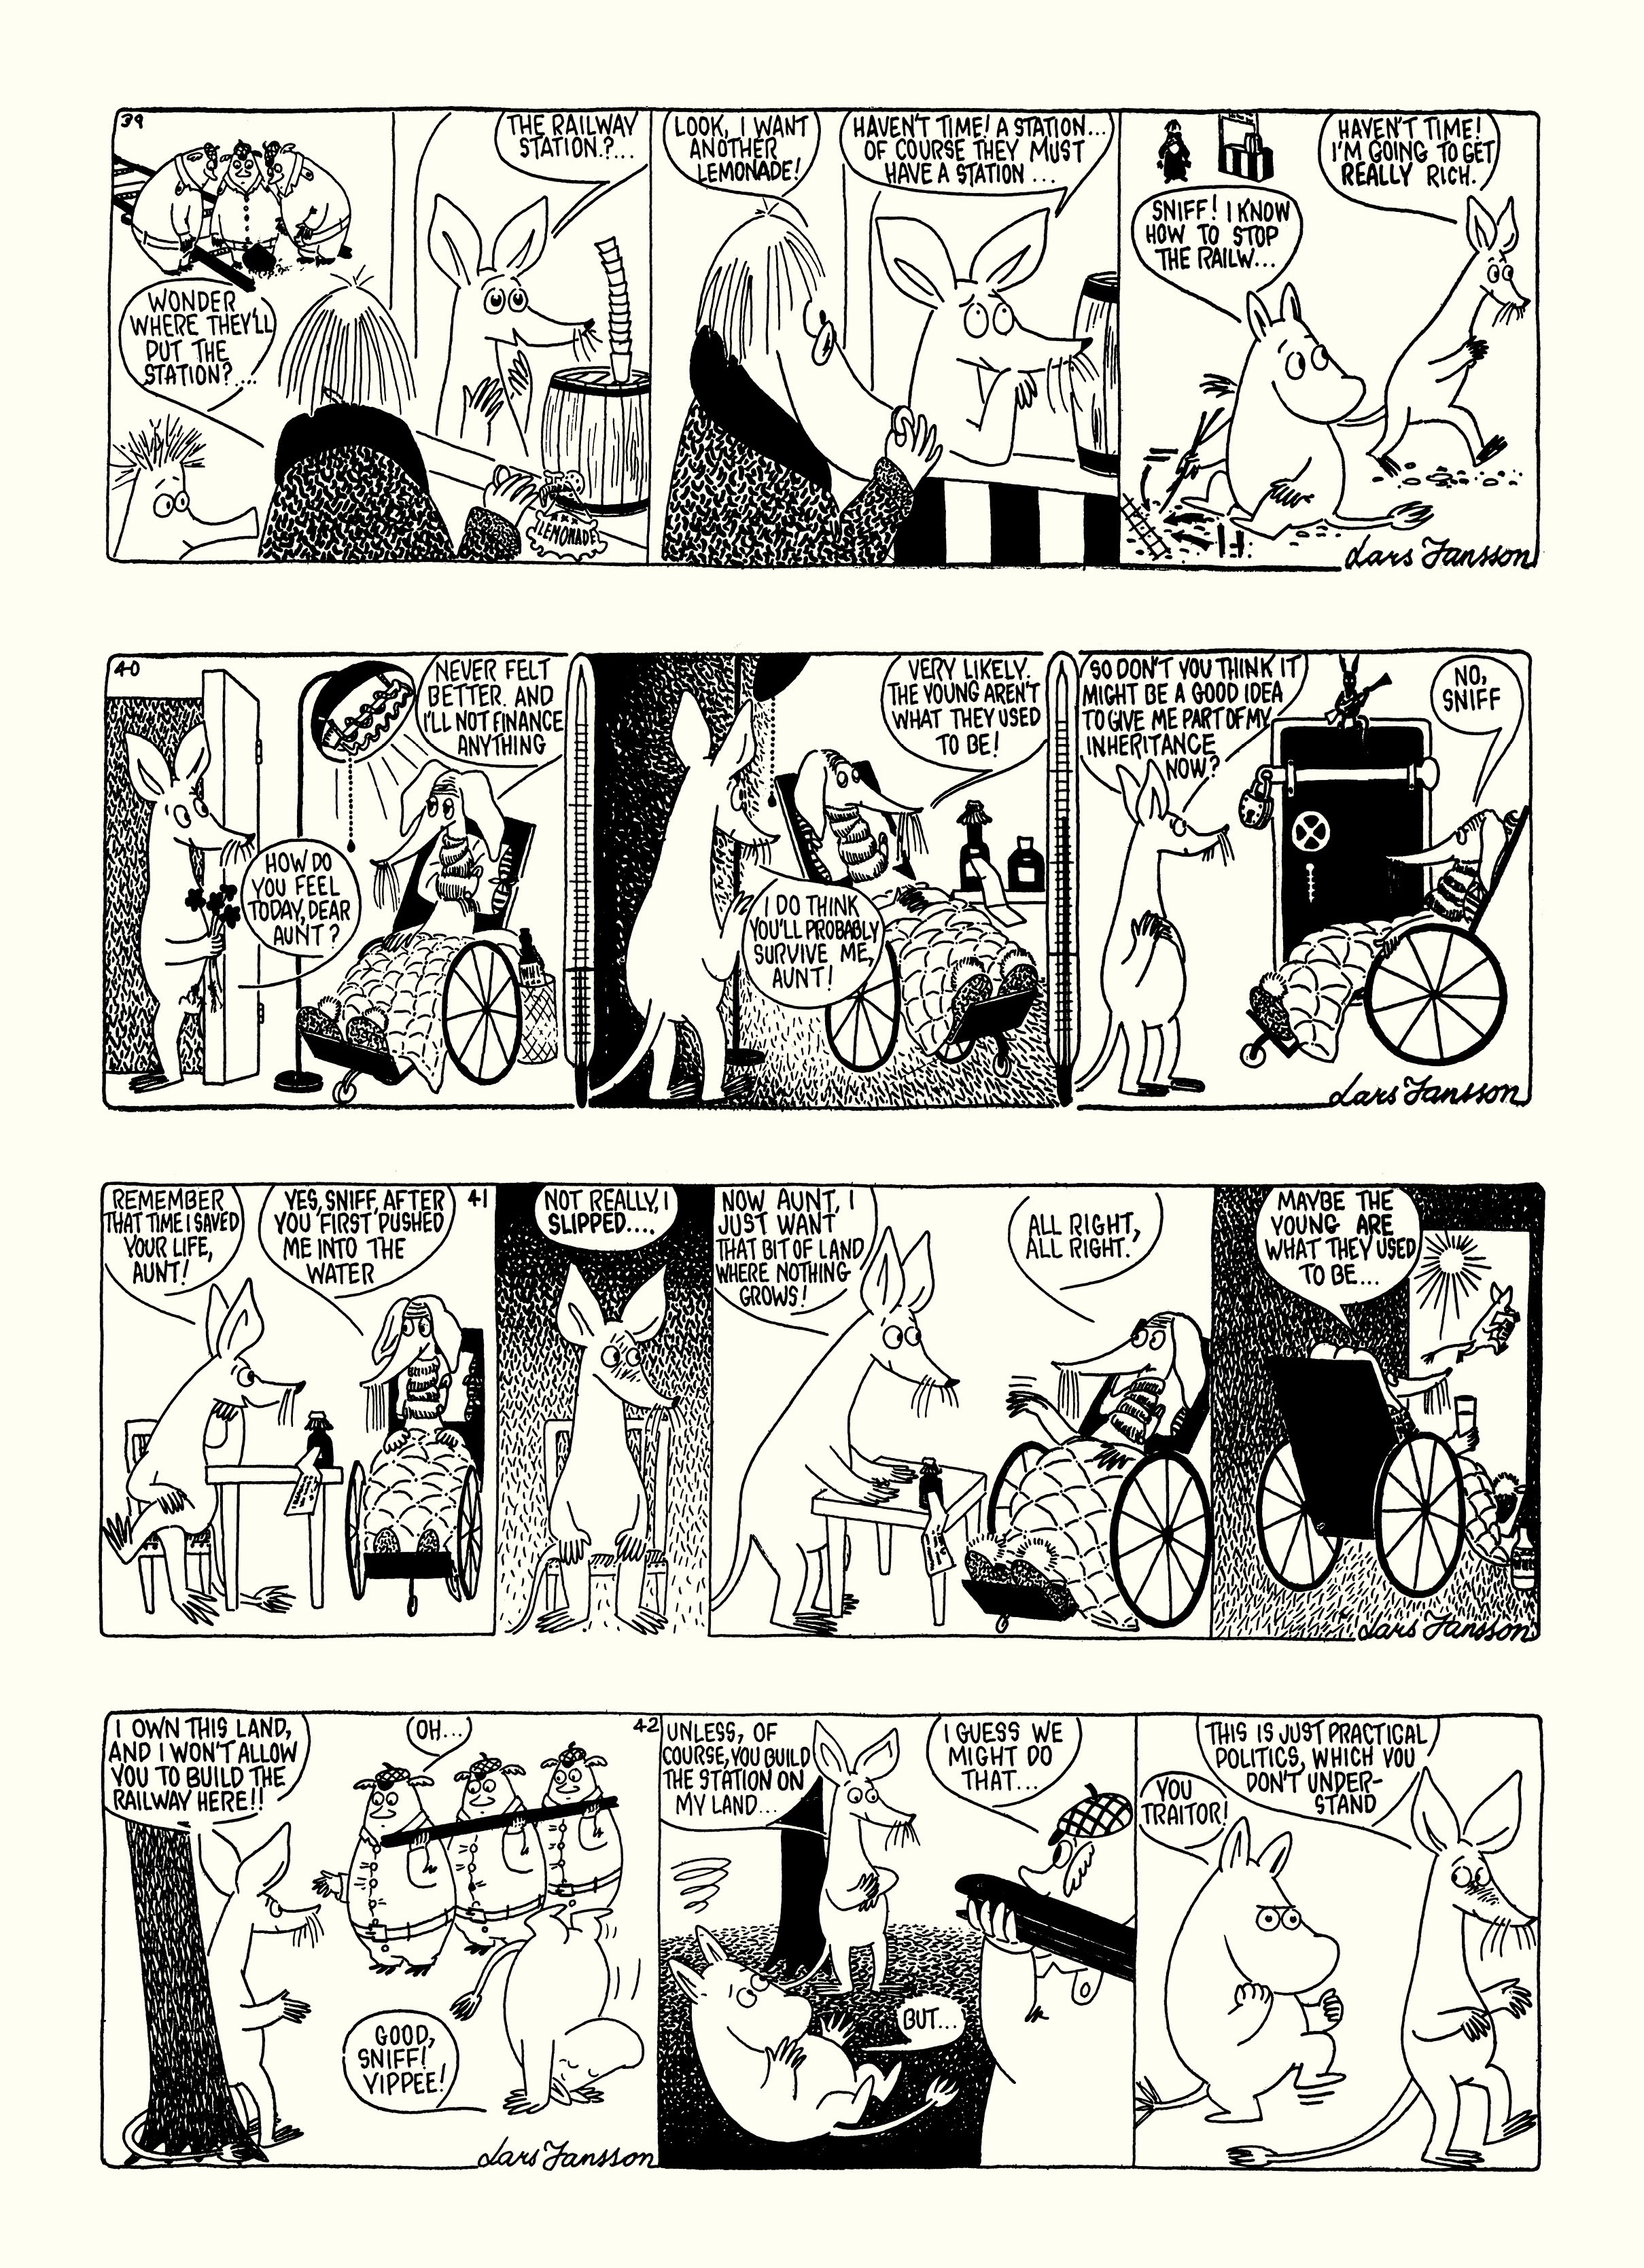 Read online Moomin: The Complete Lars Jansson Comic Strip comic -  Issue # TPB 6 - 36